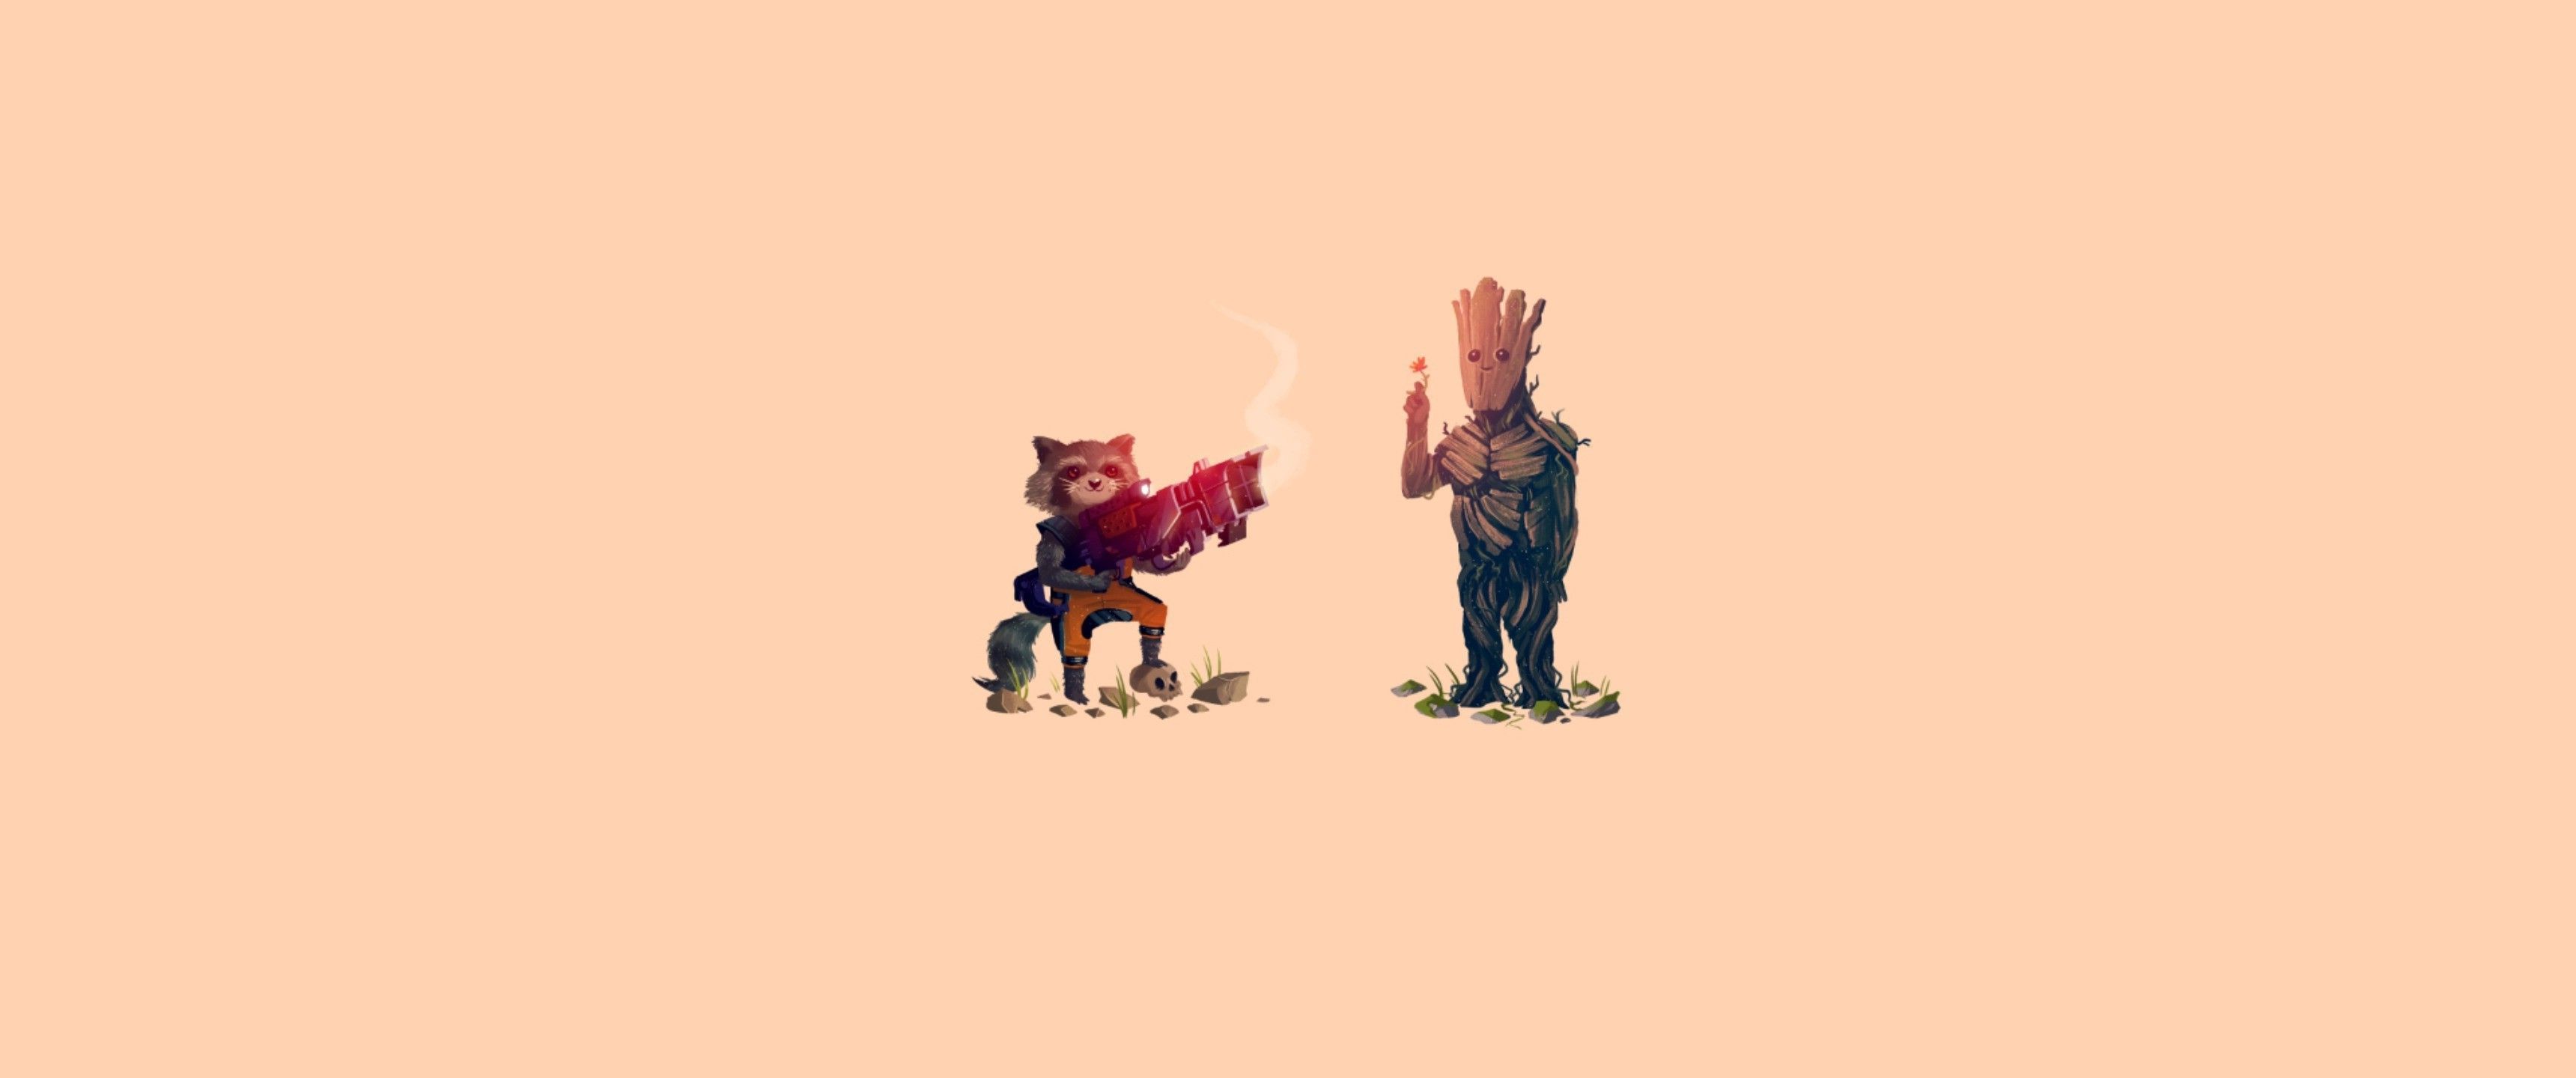 Guardians Of The Galaxy, Groot, Rocket Raccoon Wallpaper HD / Desktop and Mobile Background